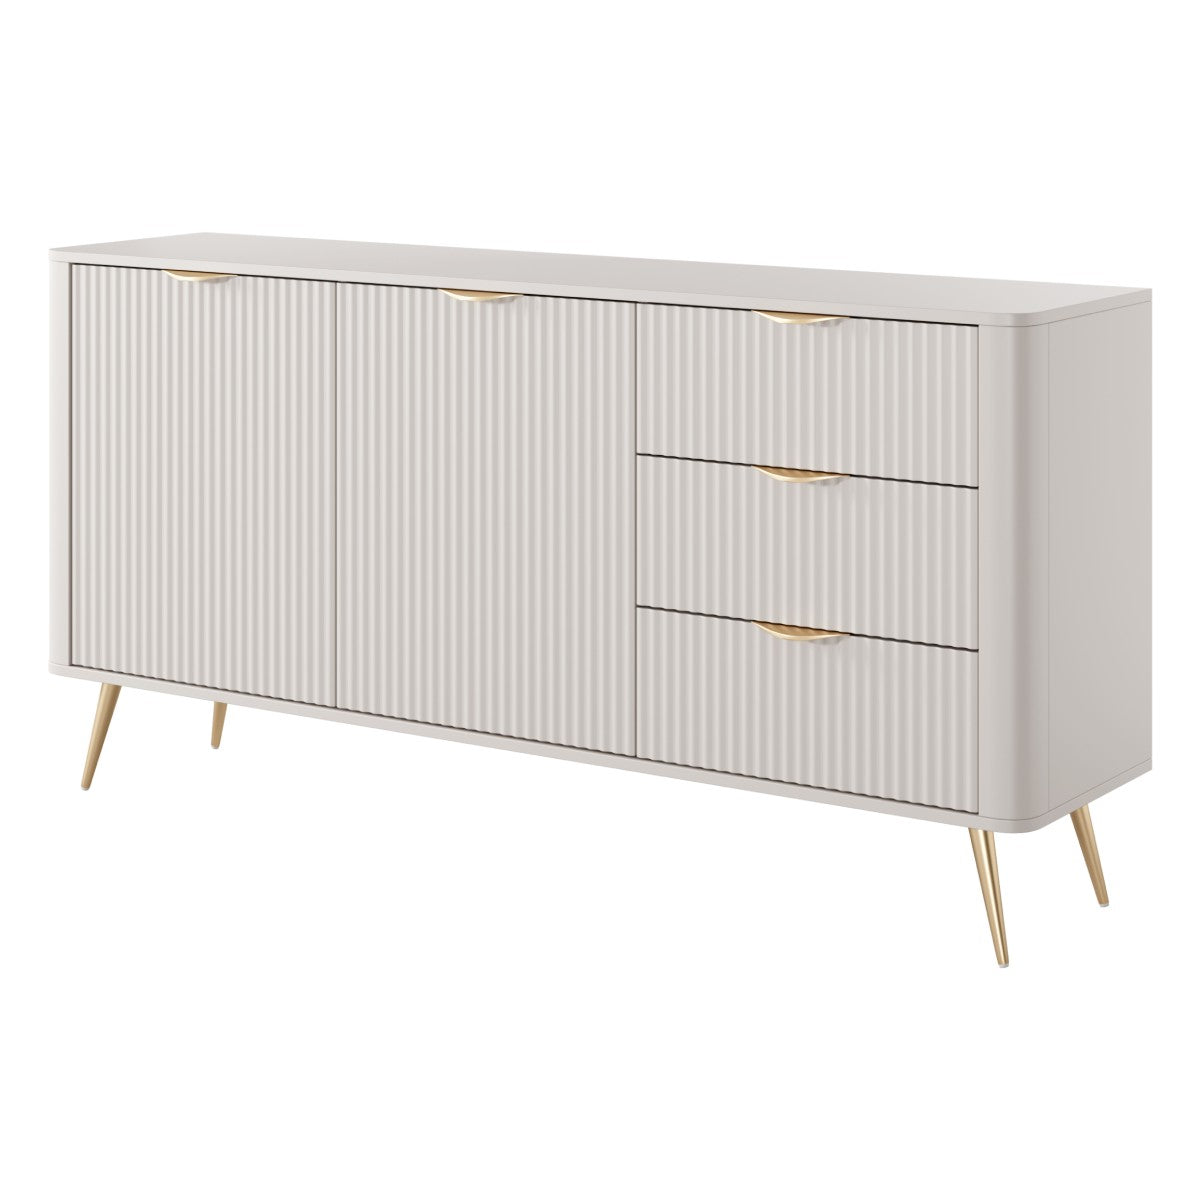 Chest of drawers LA5557